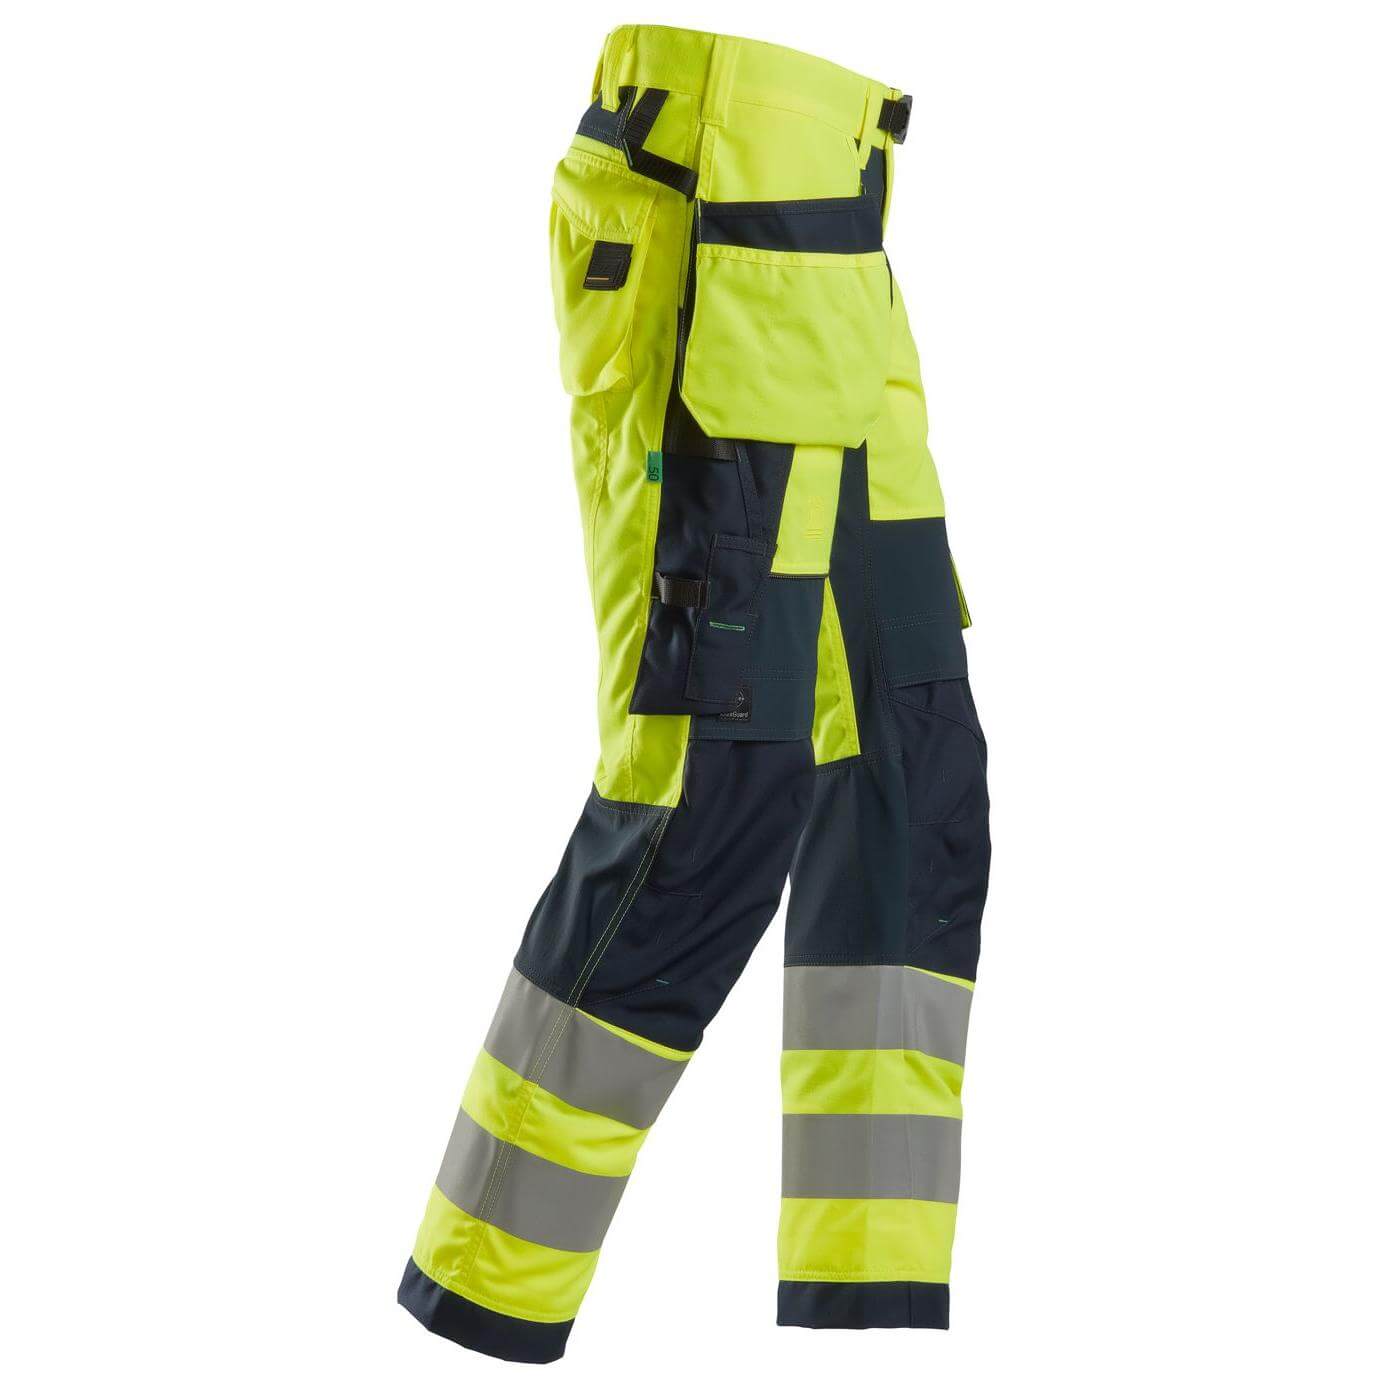 Snickers 6932 Lightweight Hi Vis Work Trousers with Holster Pockets Class 2 Hi Vis Yellow Navy Blue right #colour_hi-vis-yellow-navy-blue